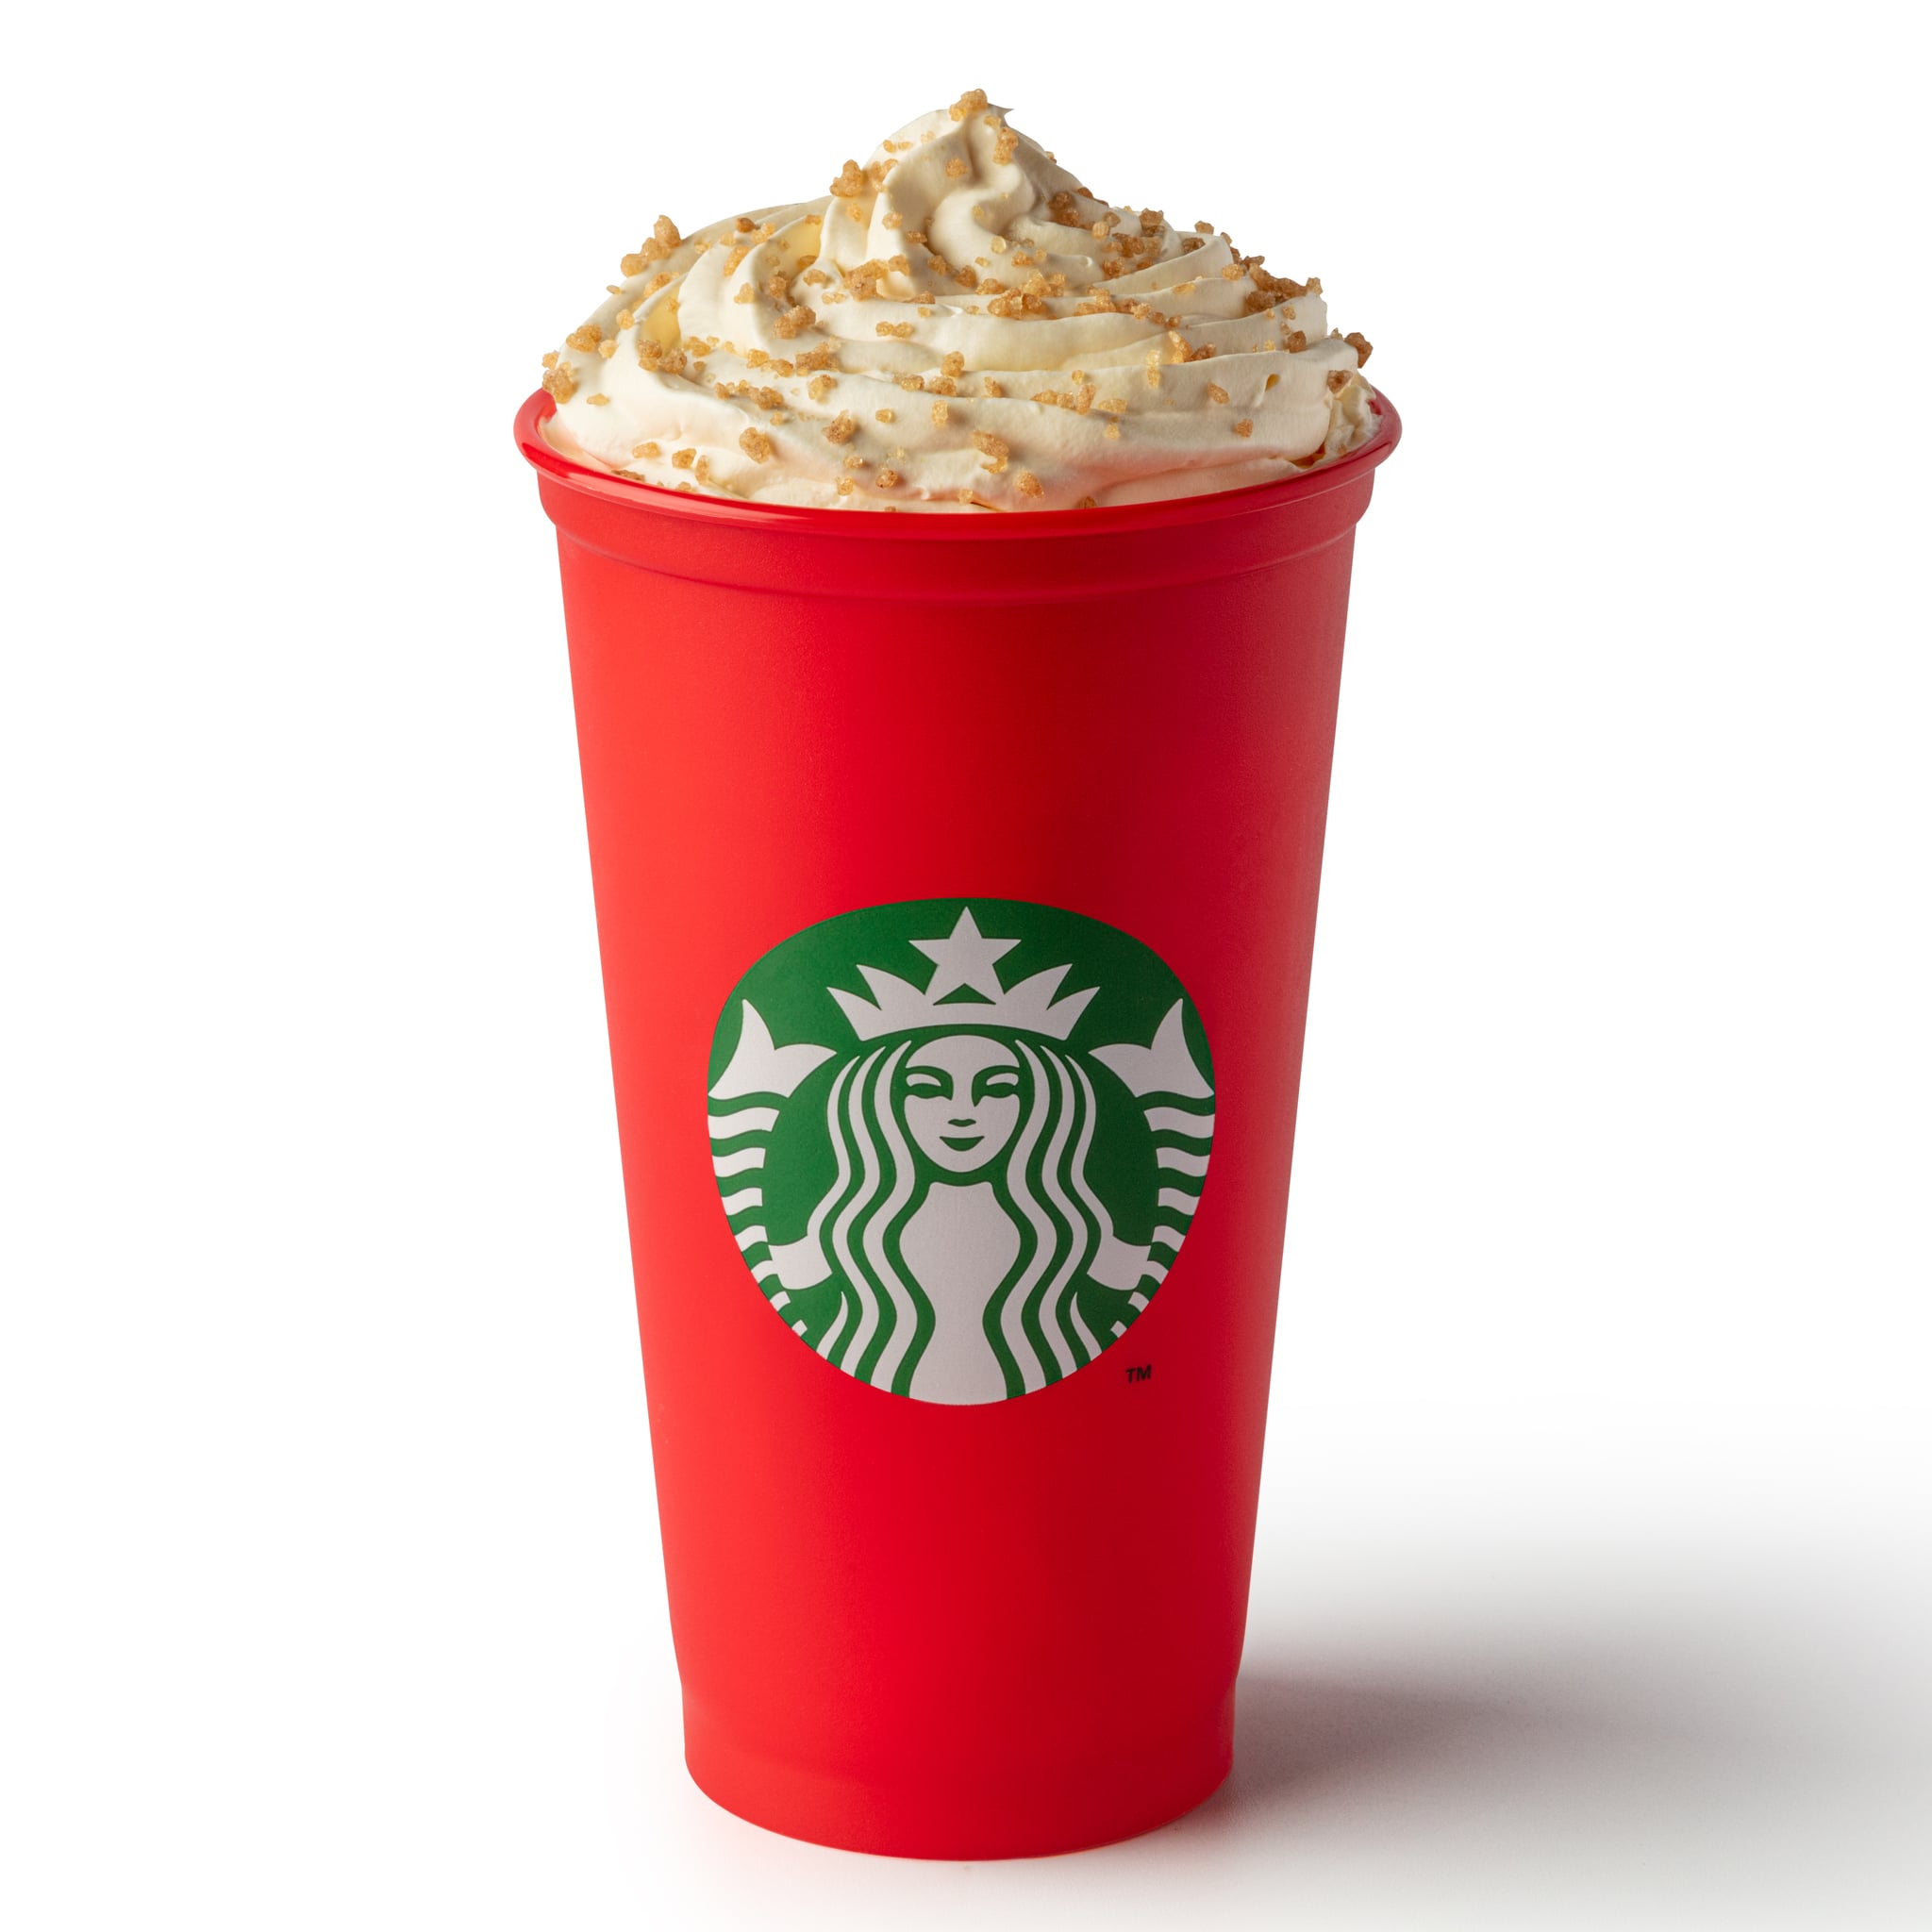 Starbucks Red Cups 2019: What Christmas Holiday Drinks are